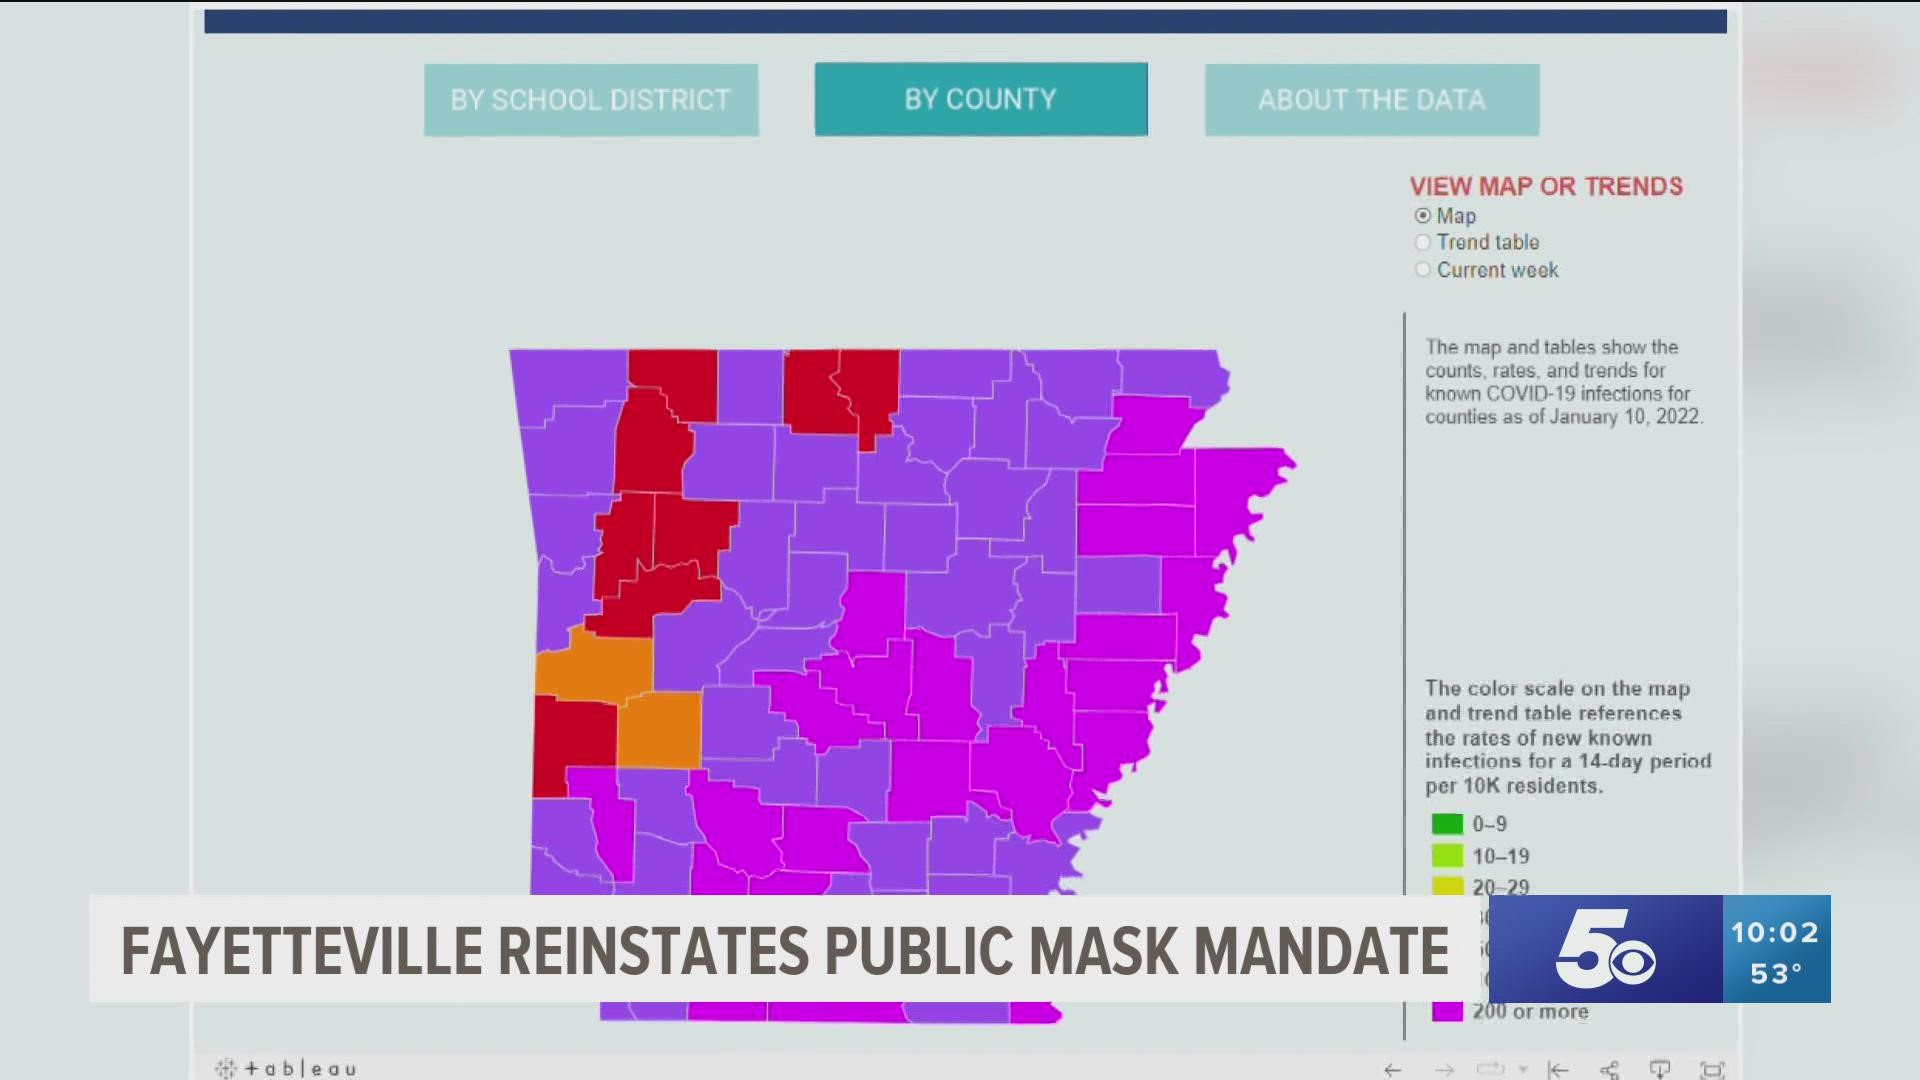 The Fayetteville City Council has decided to reinstate a temporary mask mandate for public service areas and city buildings.